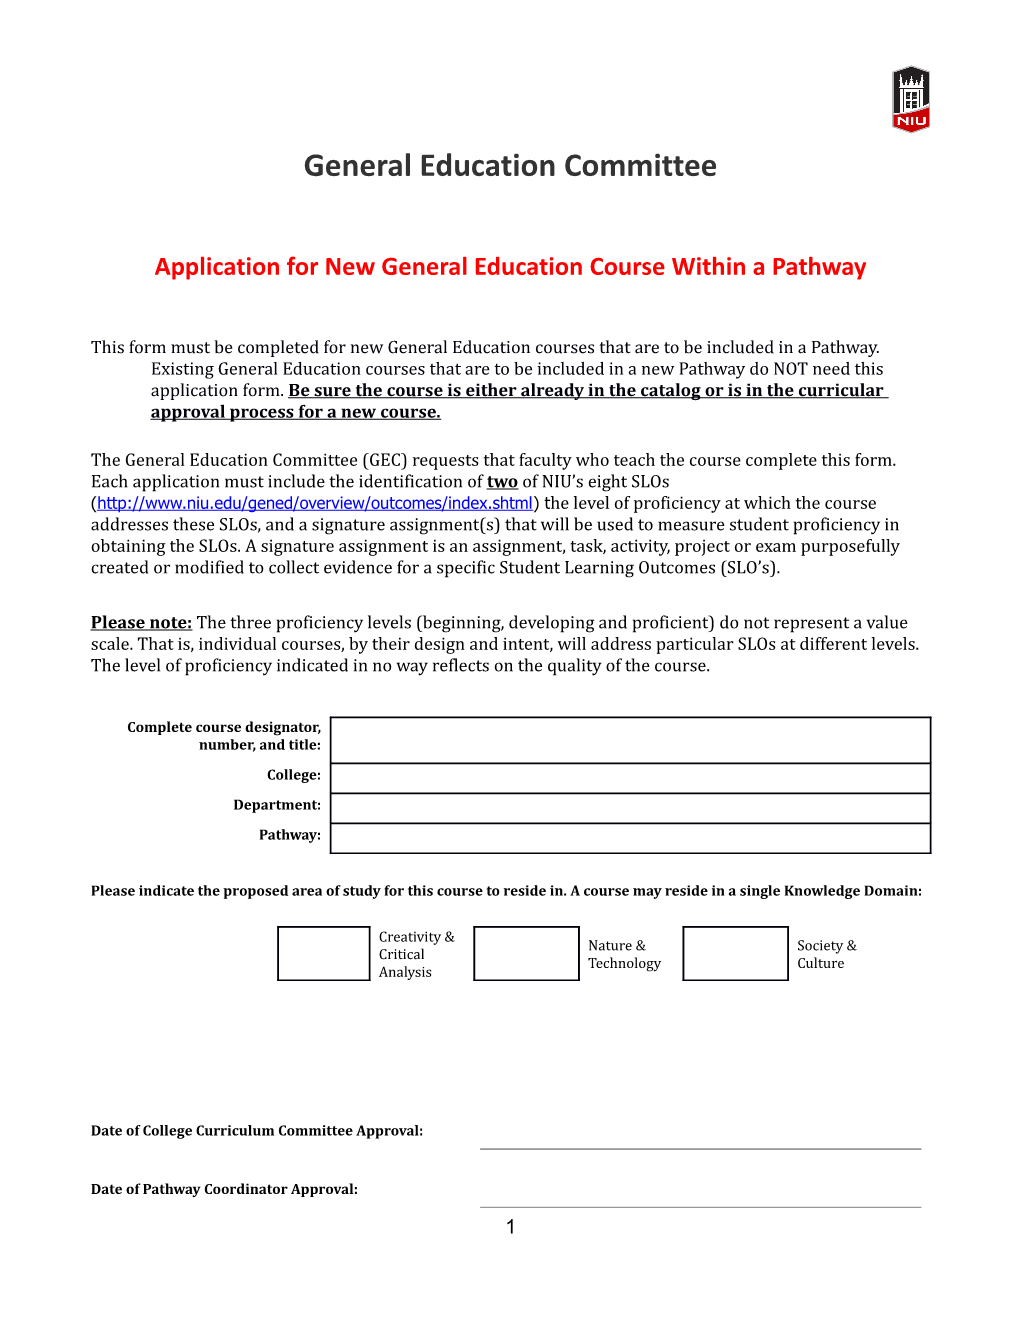 Application for New General Education Course Within a Pathway